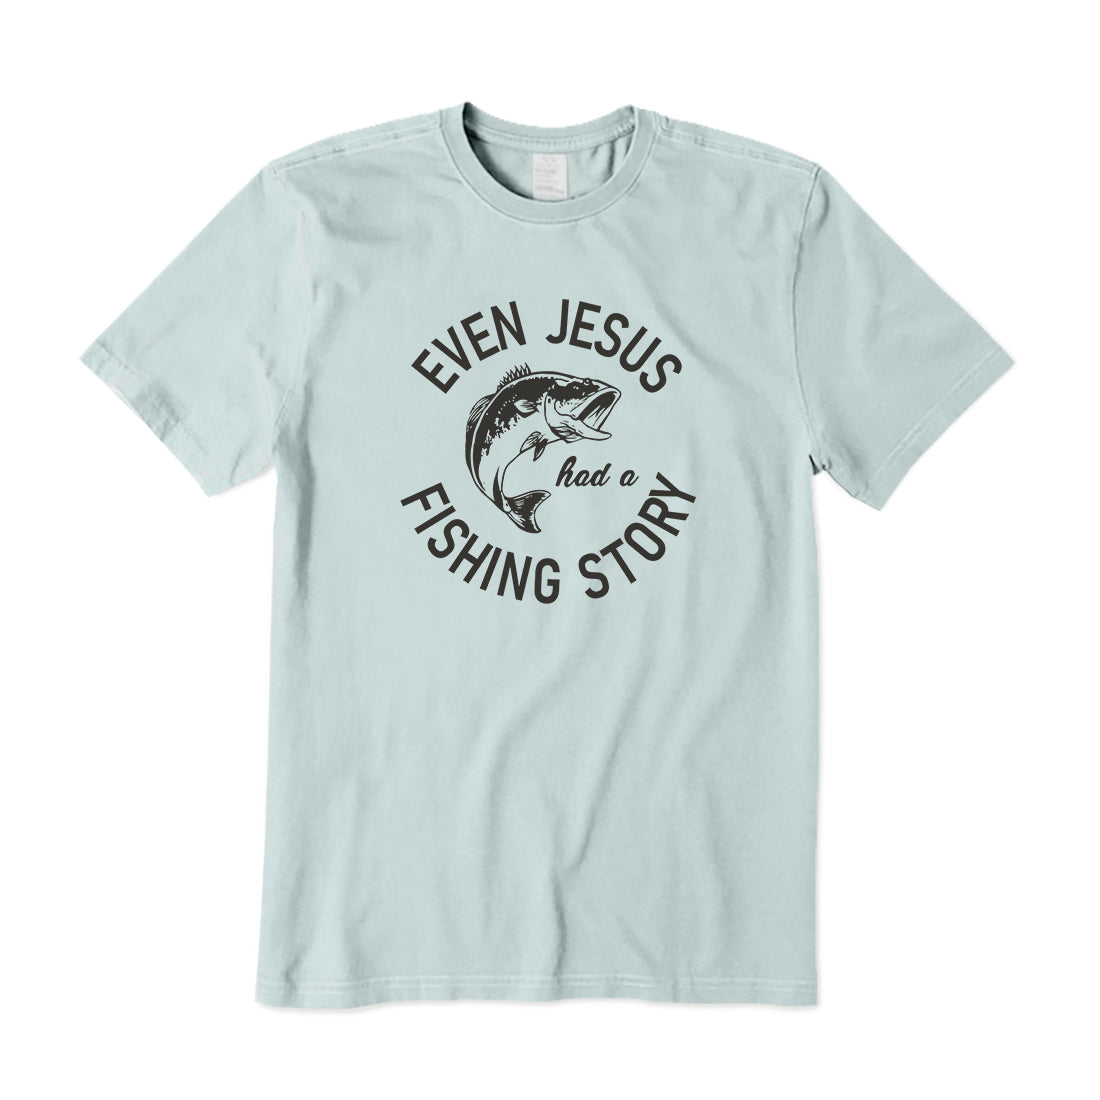 Even Jesus Had A Fishing Story T-Shirt